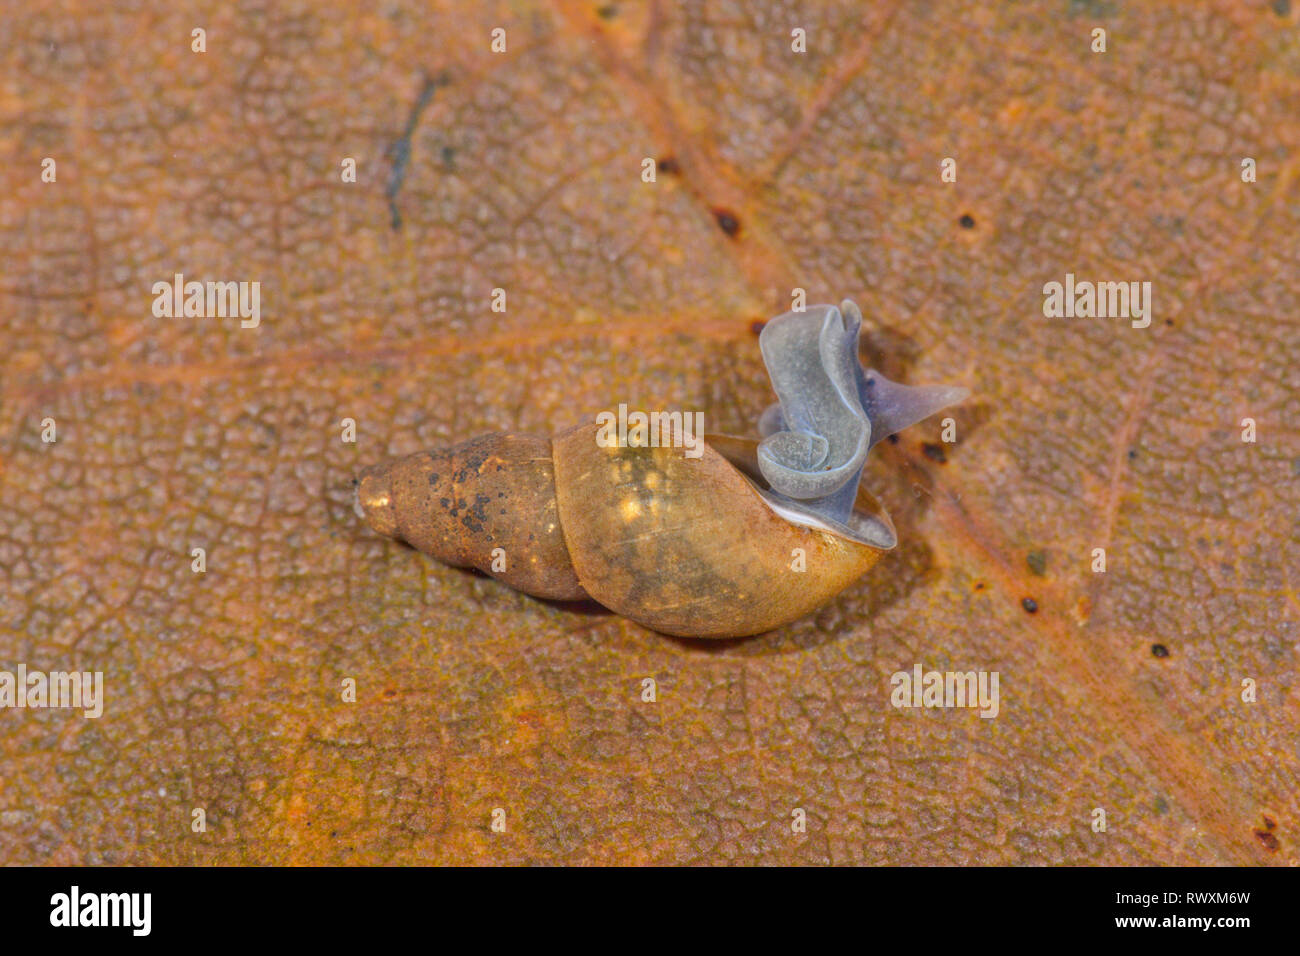 Pond Mud Snail (Omphiscola glabra) emerging. Sussex, UK. 3 of 3 Stock Photo